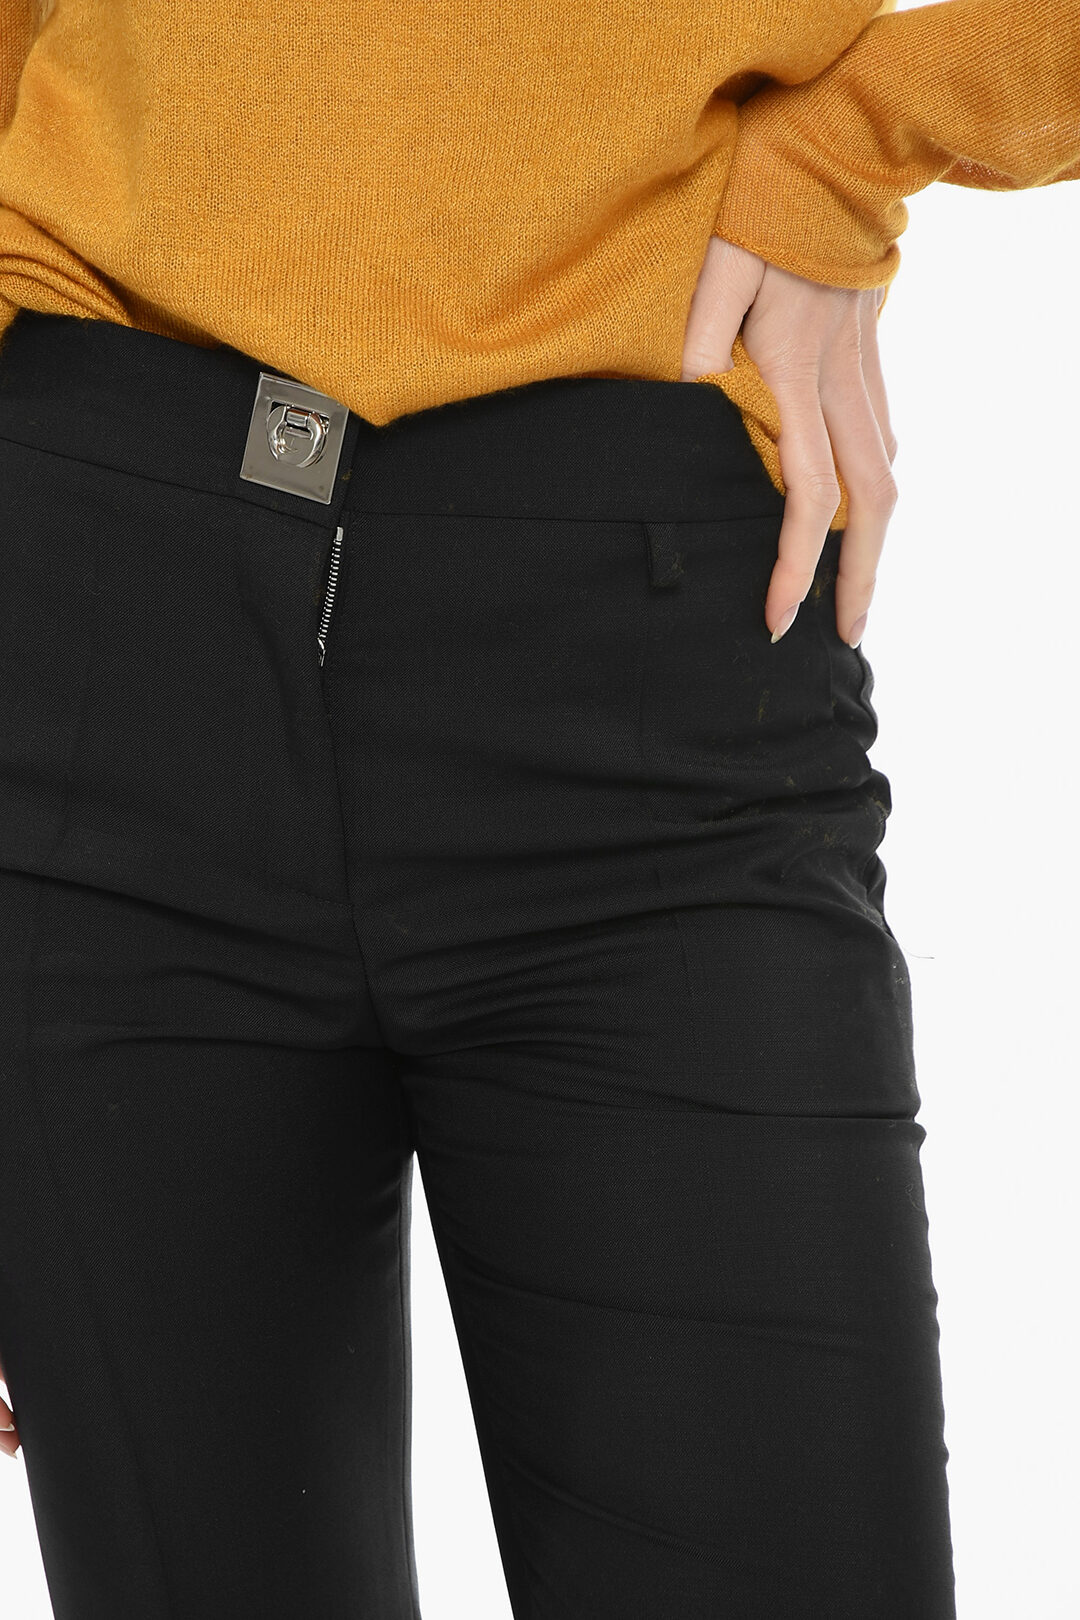 orSlow - Regular Fit Fatigue Pants - Black – Withered Fig